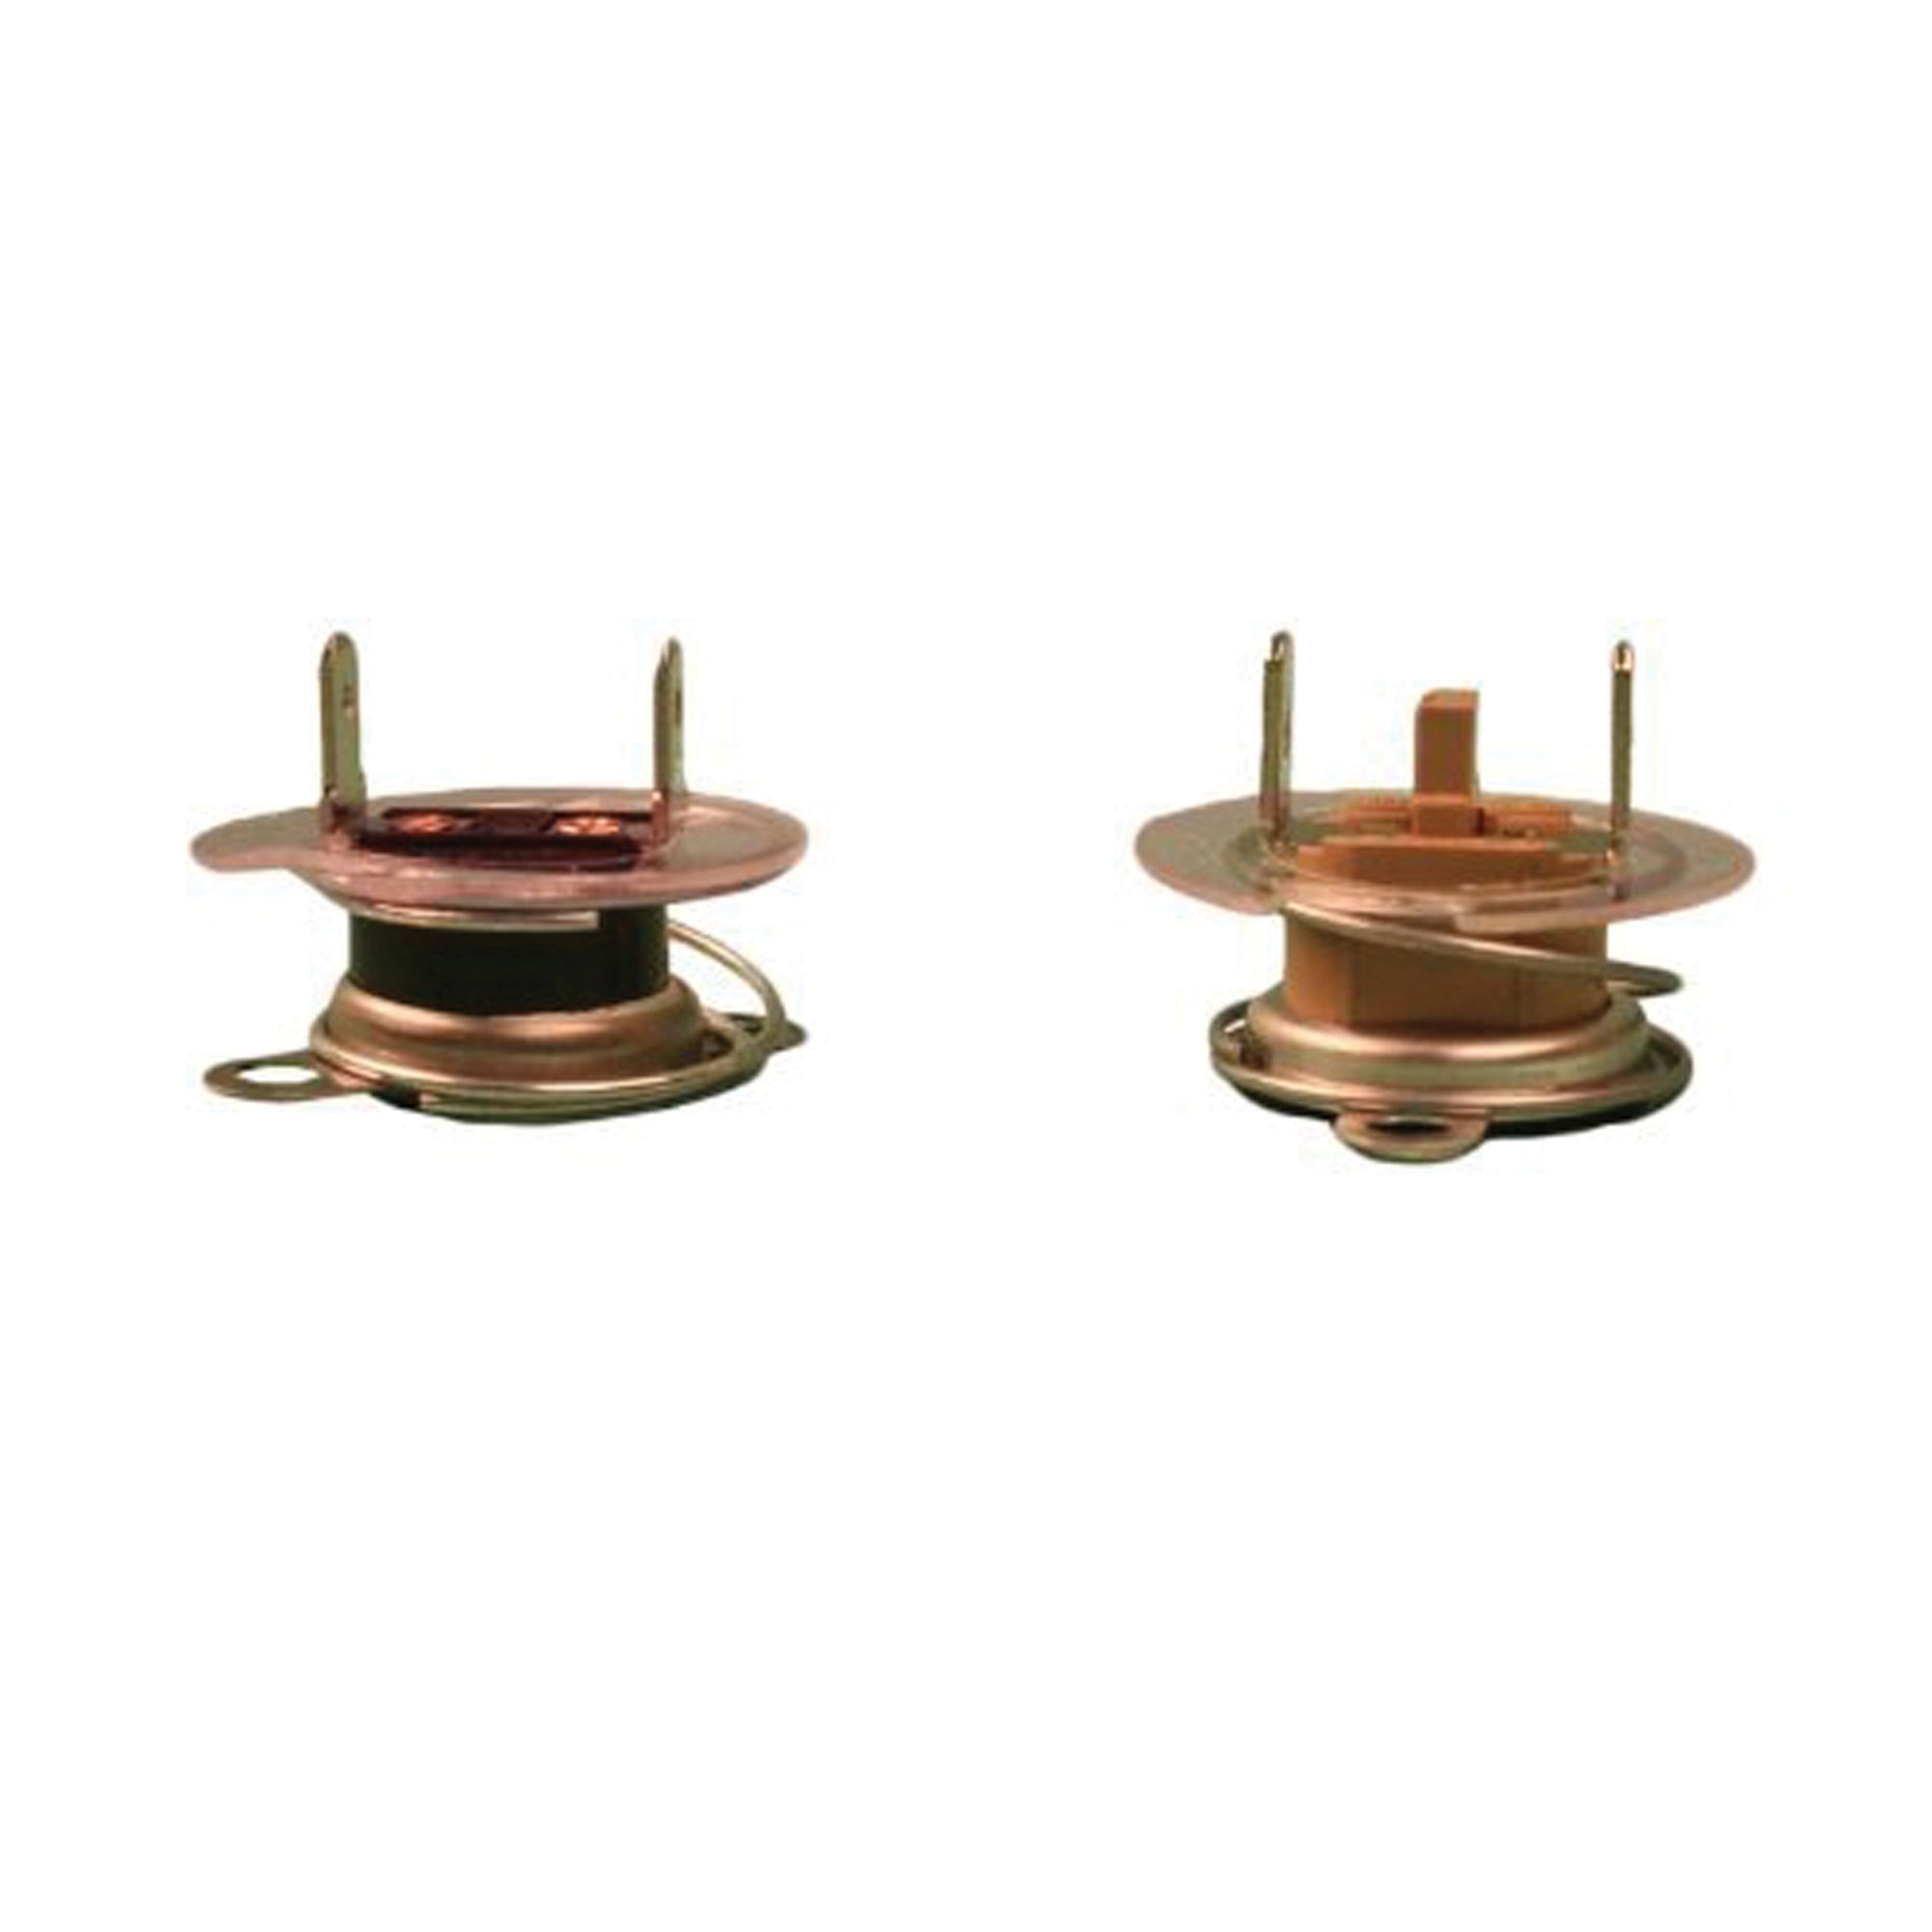 Atwood 91873 Pilot Water Heater Replacement Parts - Thermostat/E.C.O. 110 VAC